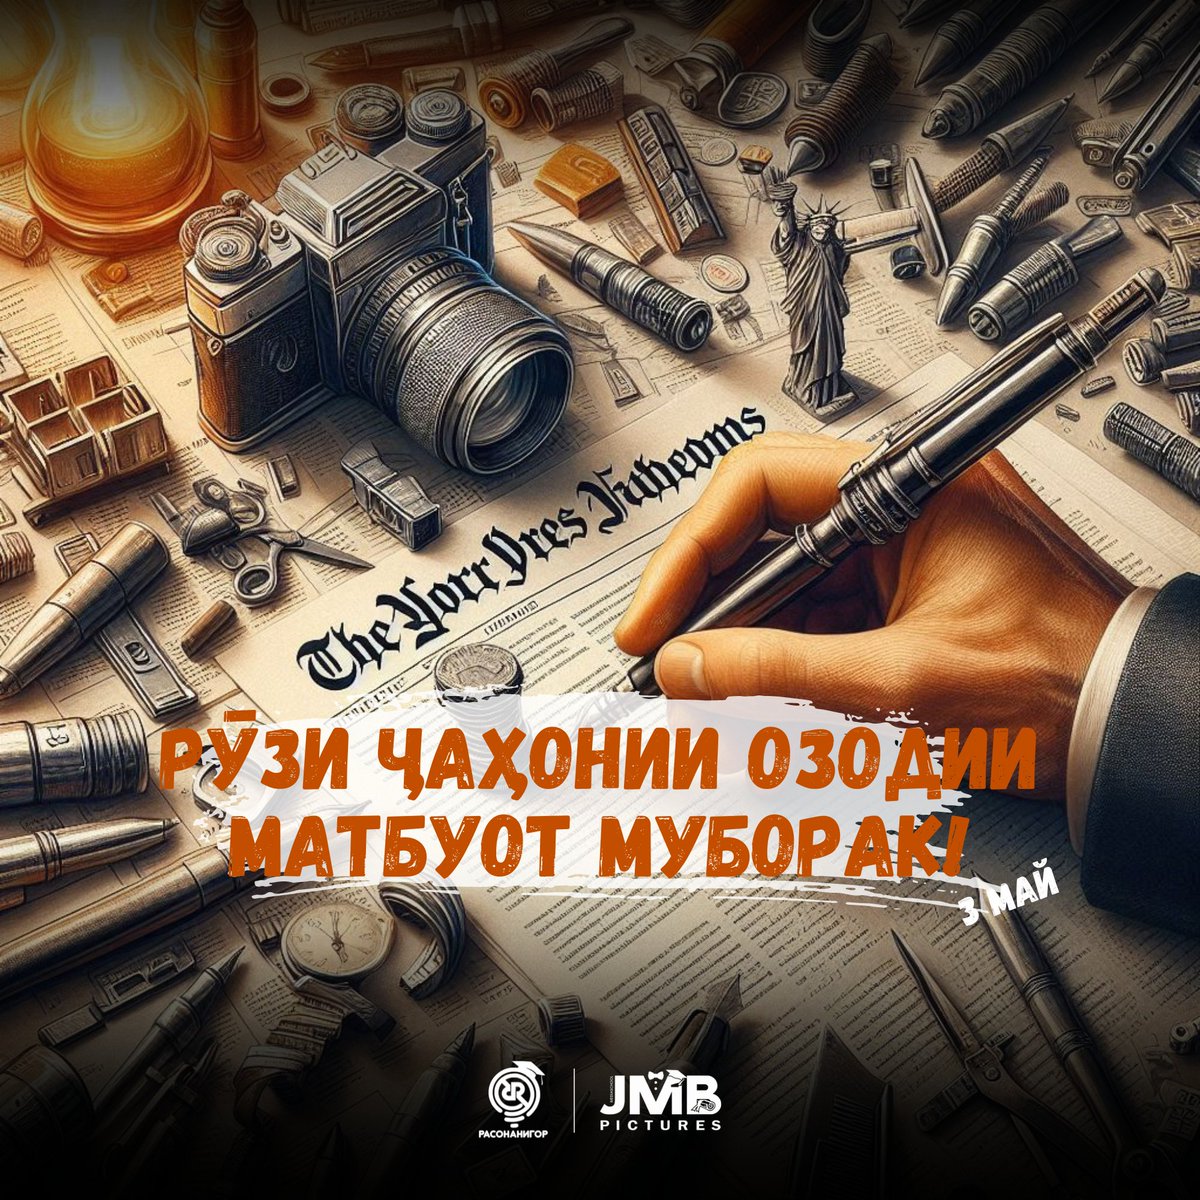 📰Happy World Press Freedom Day!
🗞 May our press always be free and let journalists continue their important work without fear, problems or obstacles.

🤝Sincerely, @rasonanigor & Mediaschool @jmb_pictures 🧡🤍